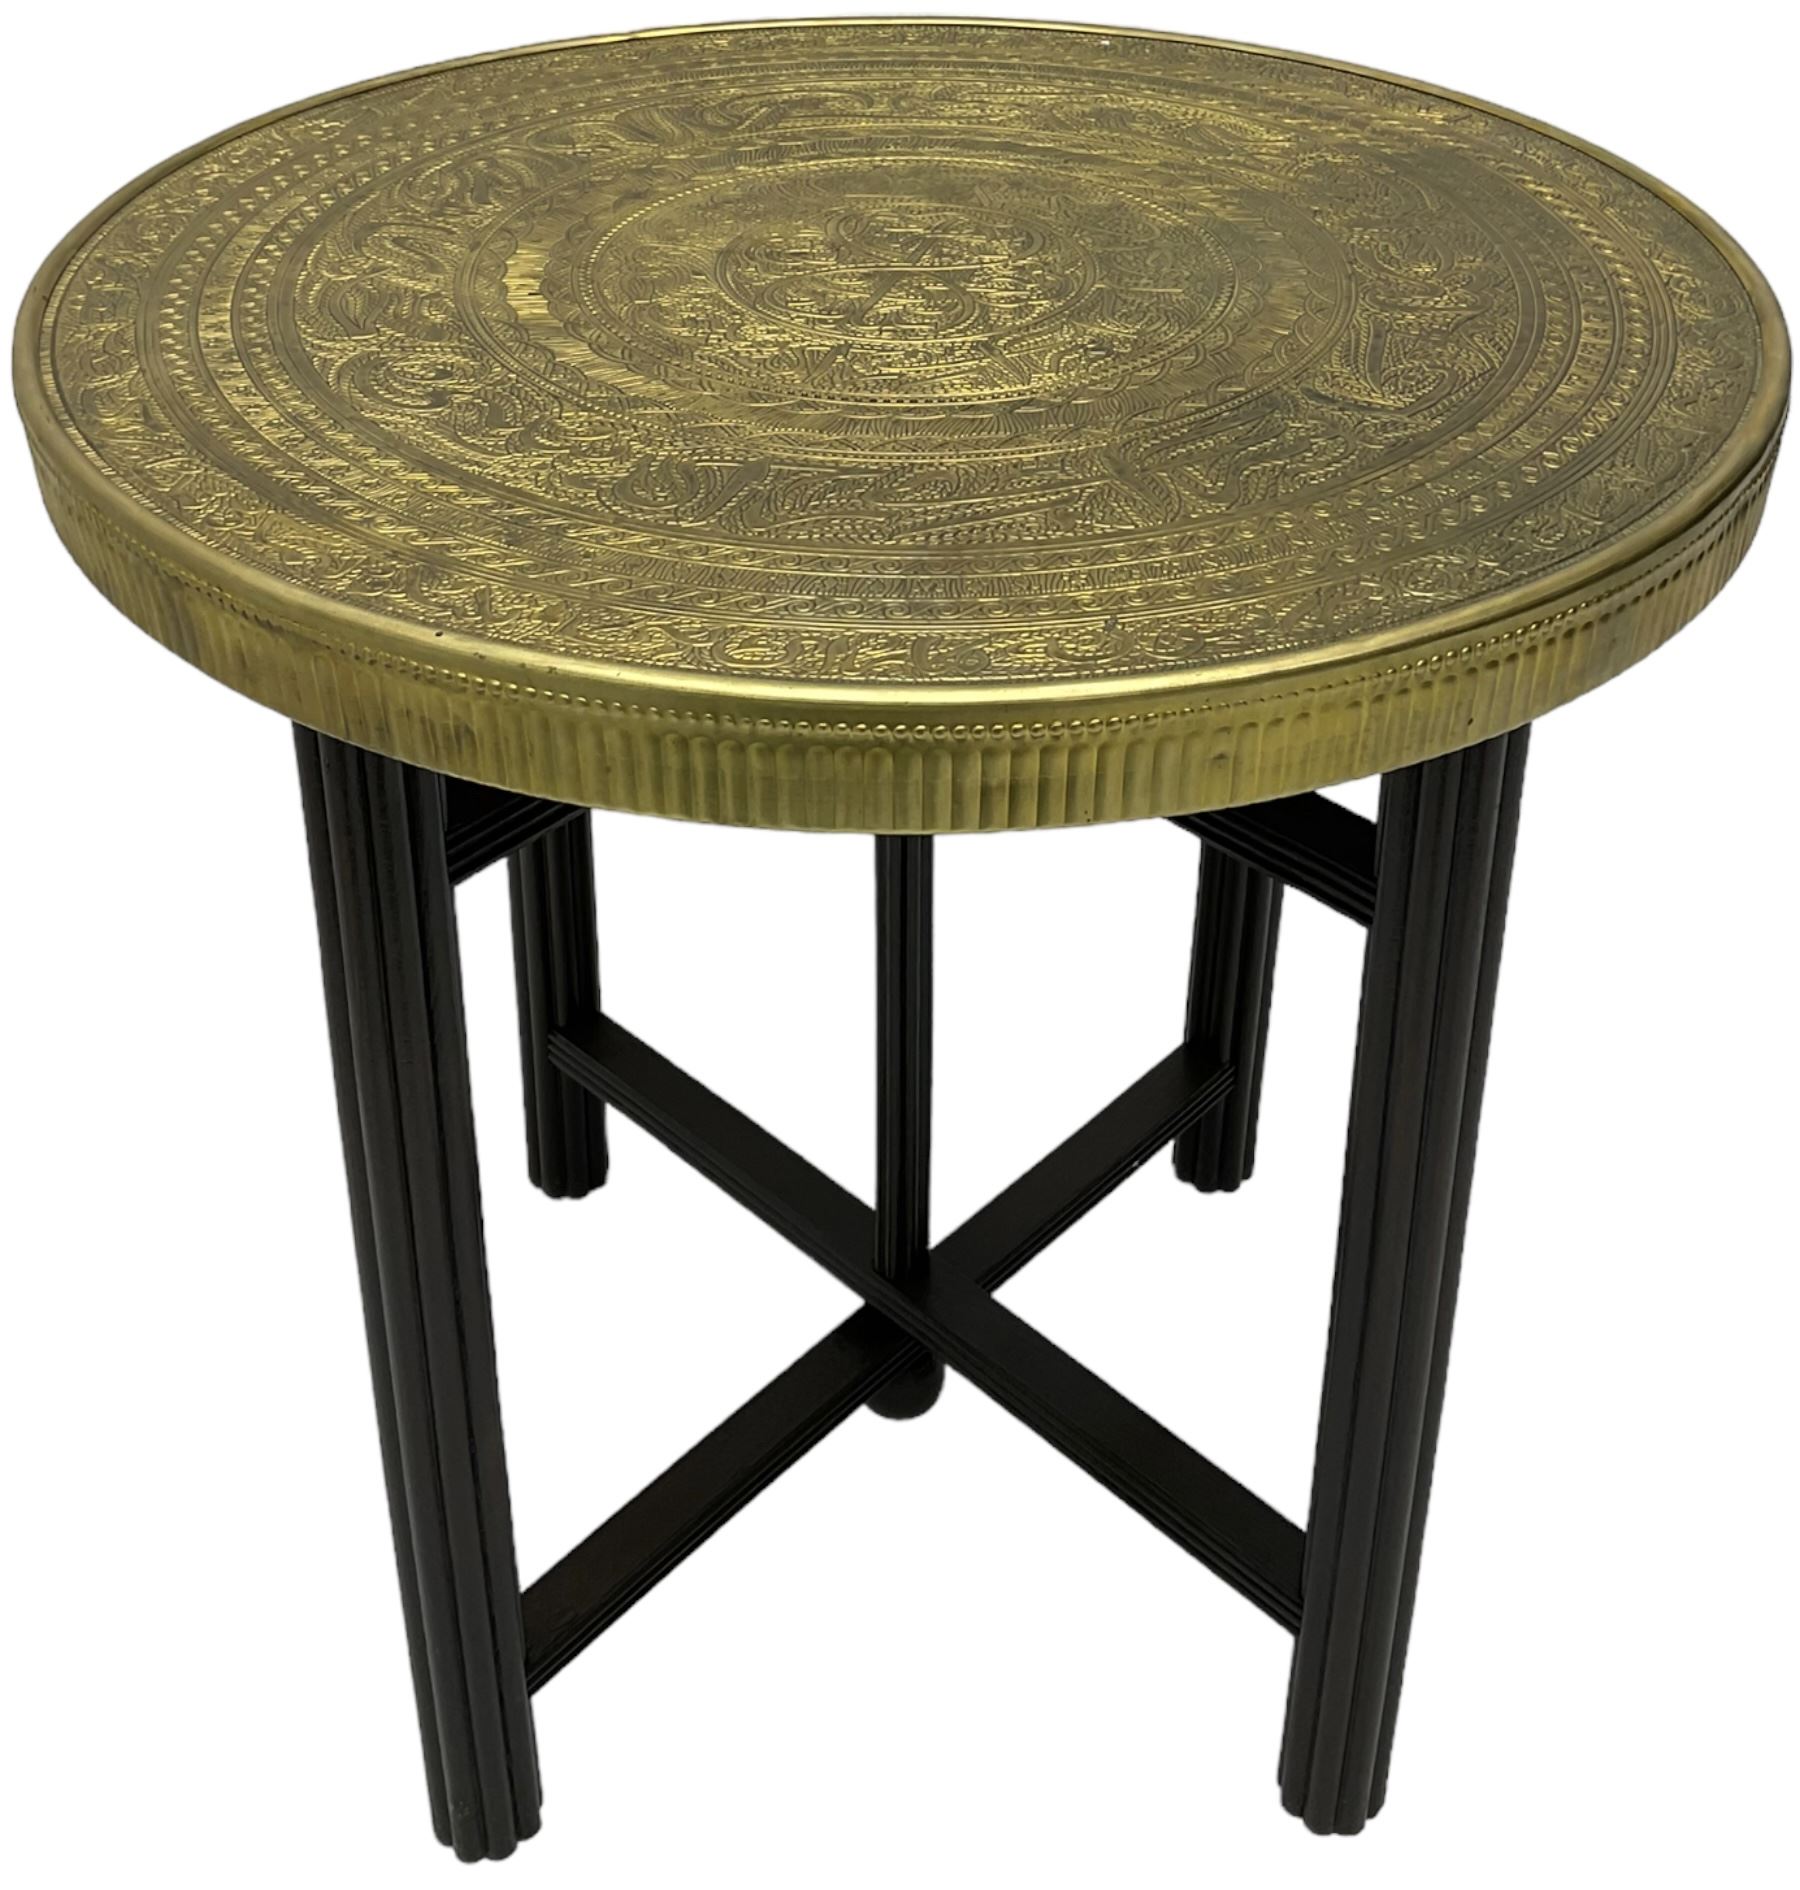 Indian brass topped folding benares table